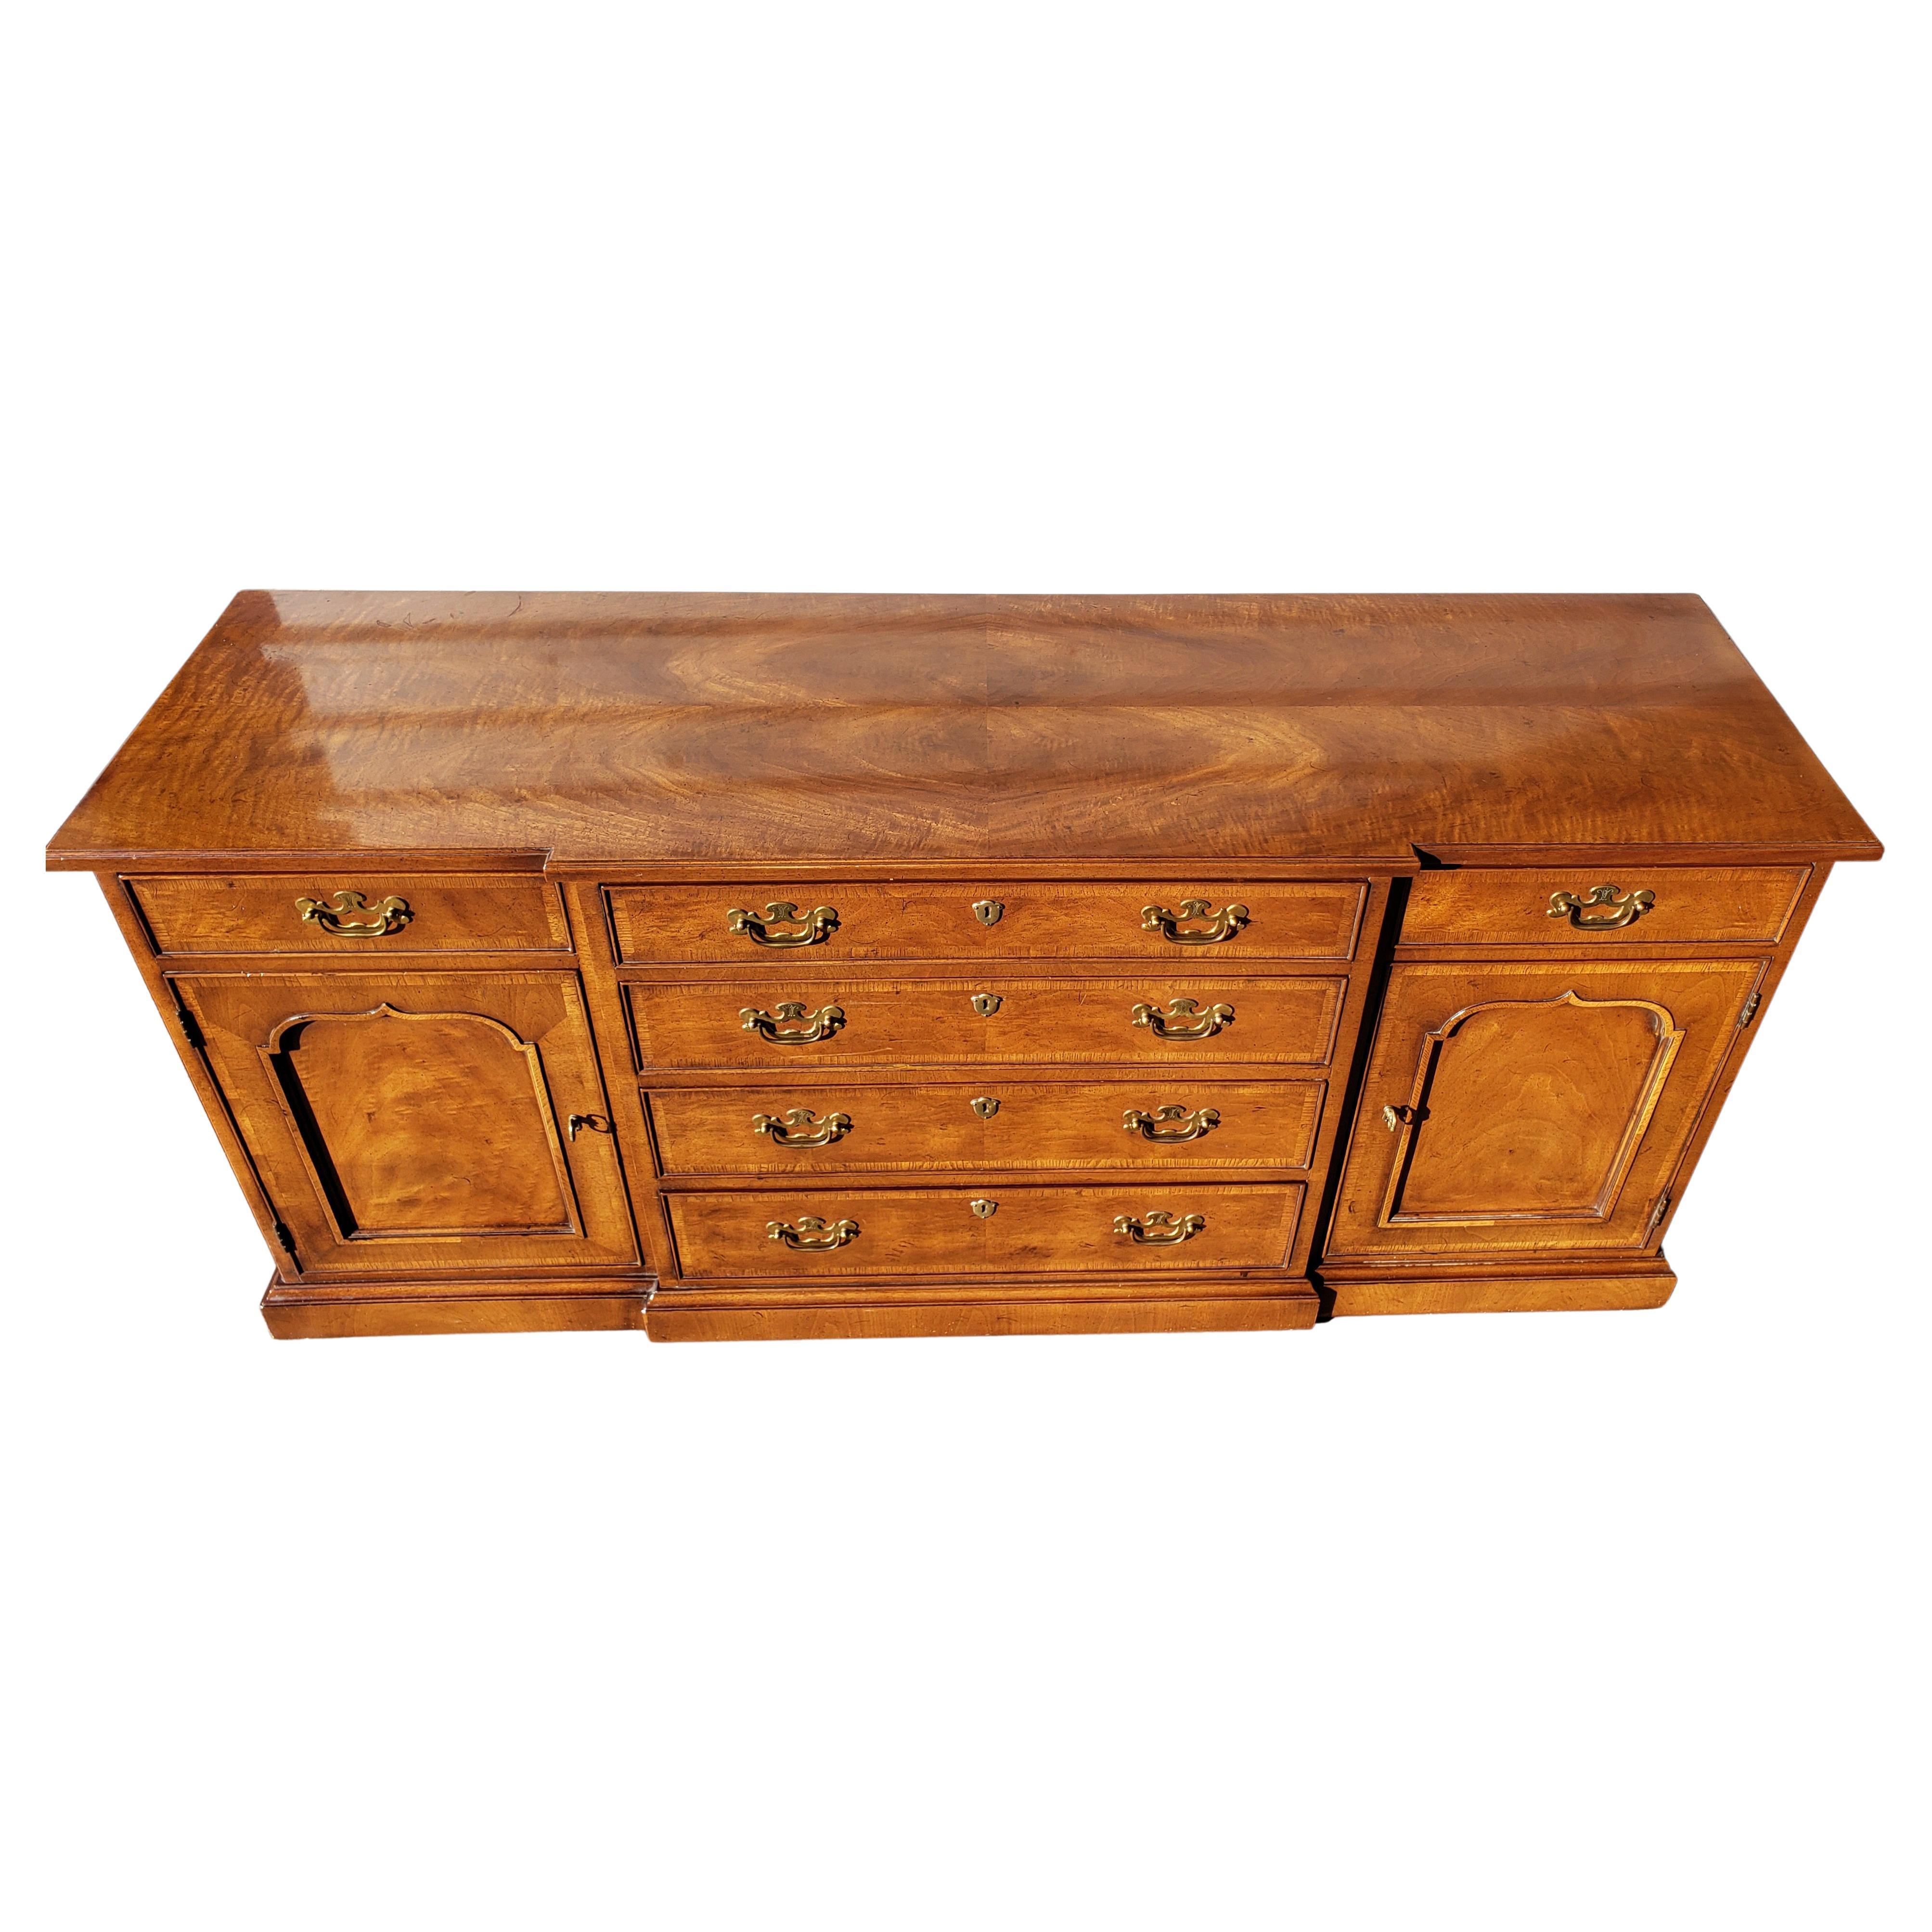 Henredon's 18th century Portfolio banded burl walnut credenza buffet. 
Burl walnut veneer. Banded front. On wheels for Easy handling. One shelf behind each door.
 All dovetailed drawers working flawlessly. Very good vintage condition with wear